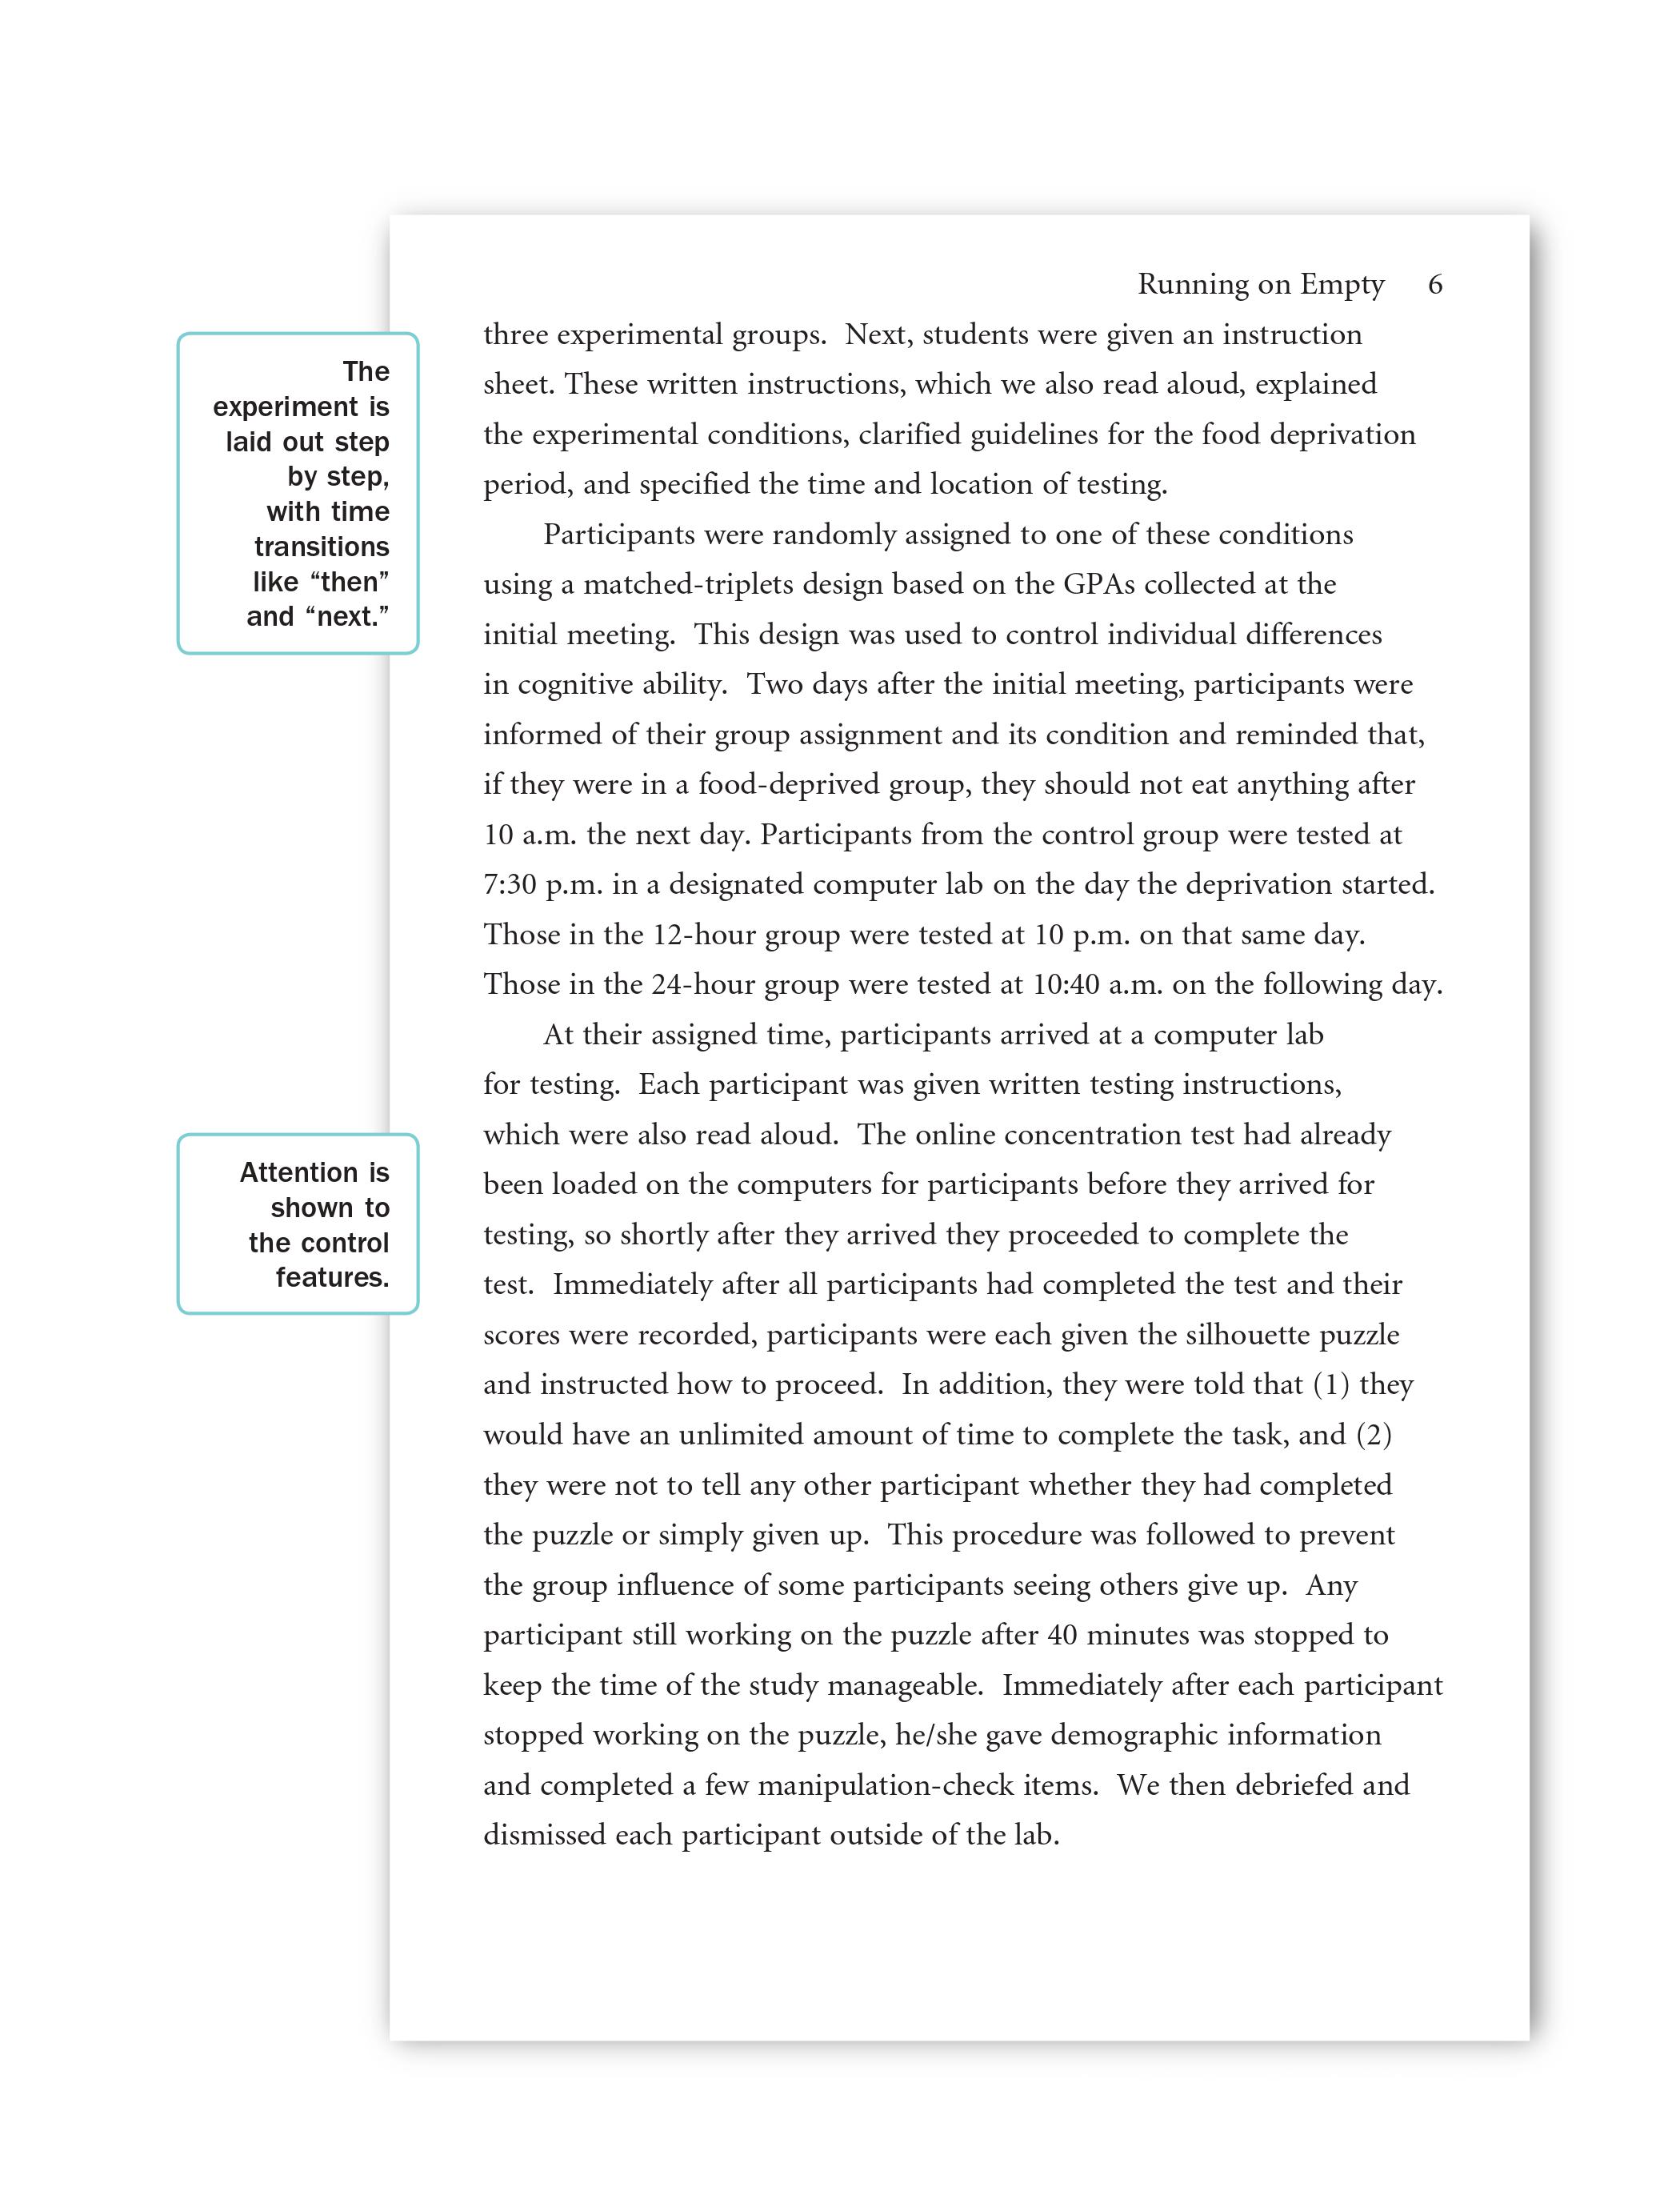 parts of the common research paper